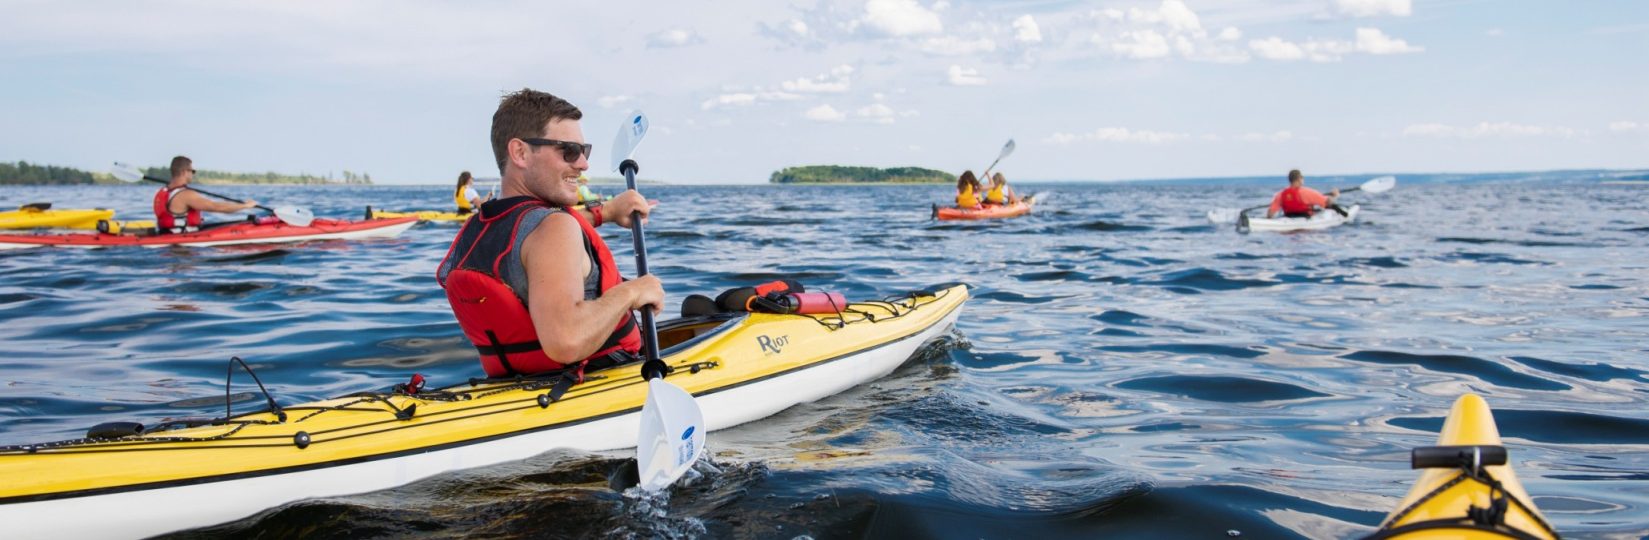 Kayaking with a guide at Fox Harb'r Resort